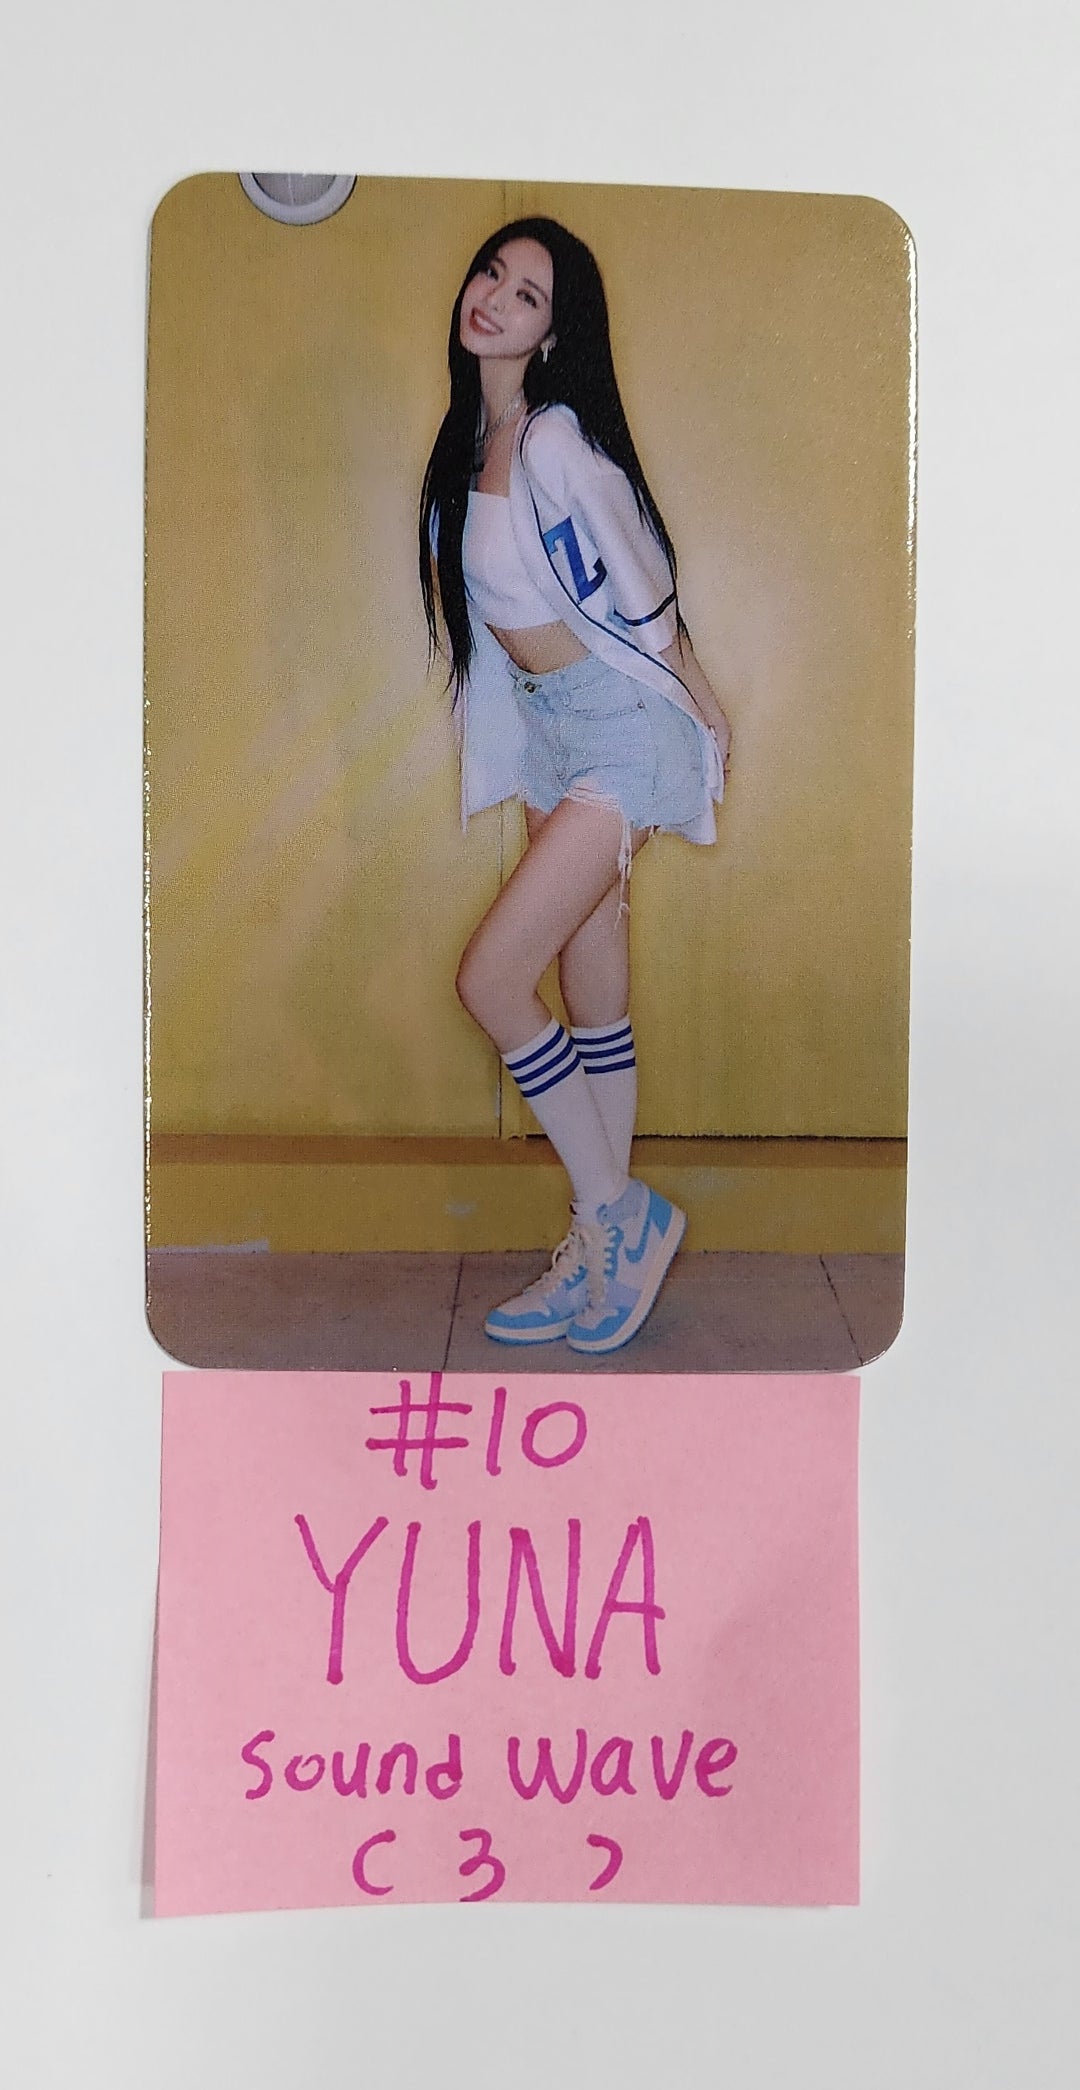 ITZY 'KILL MY DOUBT' - Soundwave Fansign Event Photocard Round 8 [23.08.22]